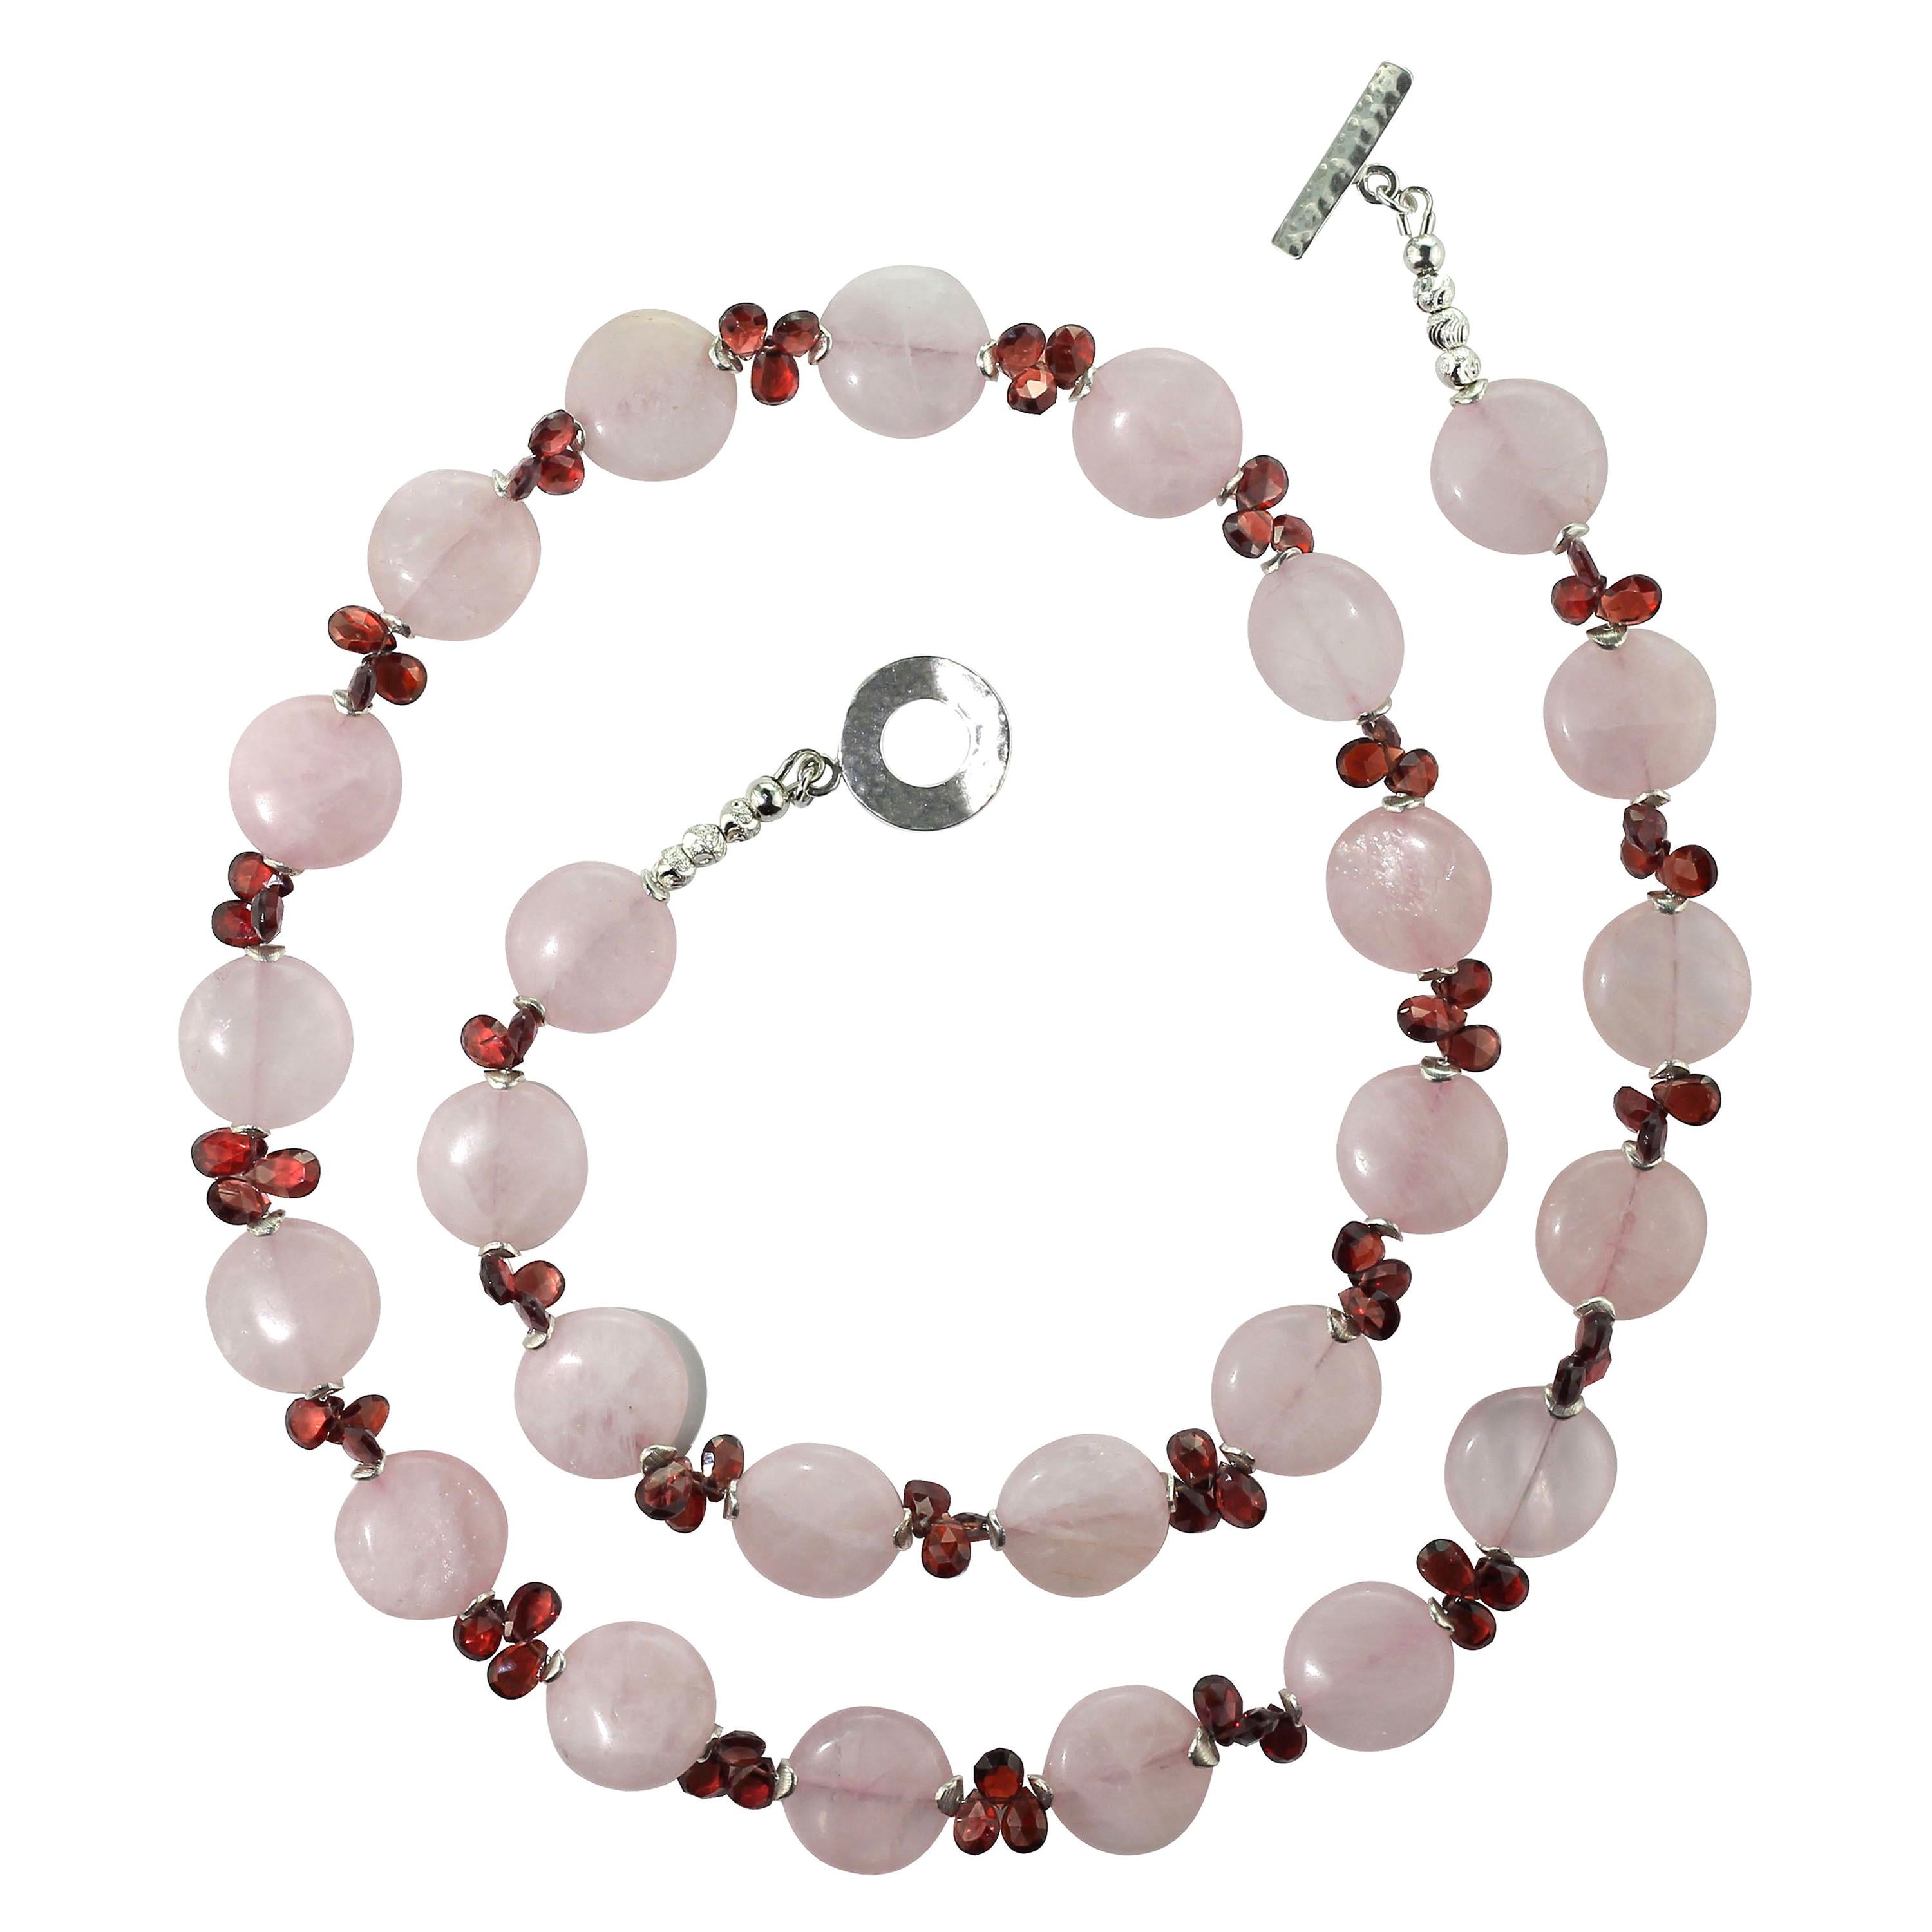 
This is an elegant, unique necklace of sparkling faceted Garnet 6 MM briolettes fluttering between warm glowing round discs of 16 MM Rose Quartz. Silver tone flutters and a Sterling Silver toggle clasp finish this lovely necklace. Wear this warm 27